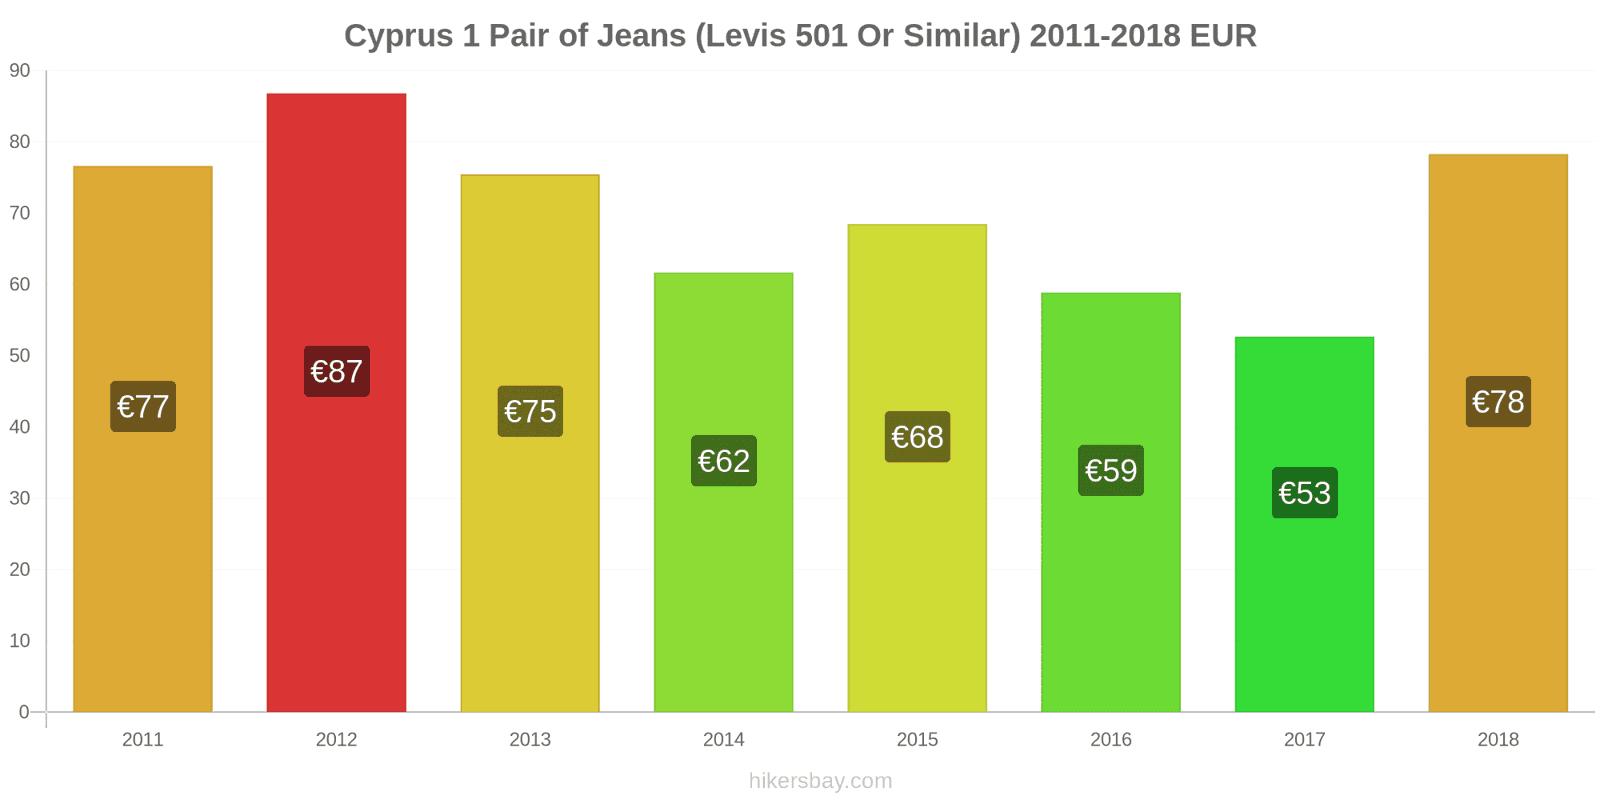 Cyprus price changes 1 pair of jeans (Levis 501 or similar) hikersbay.com